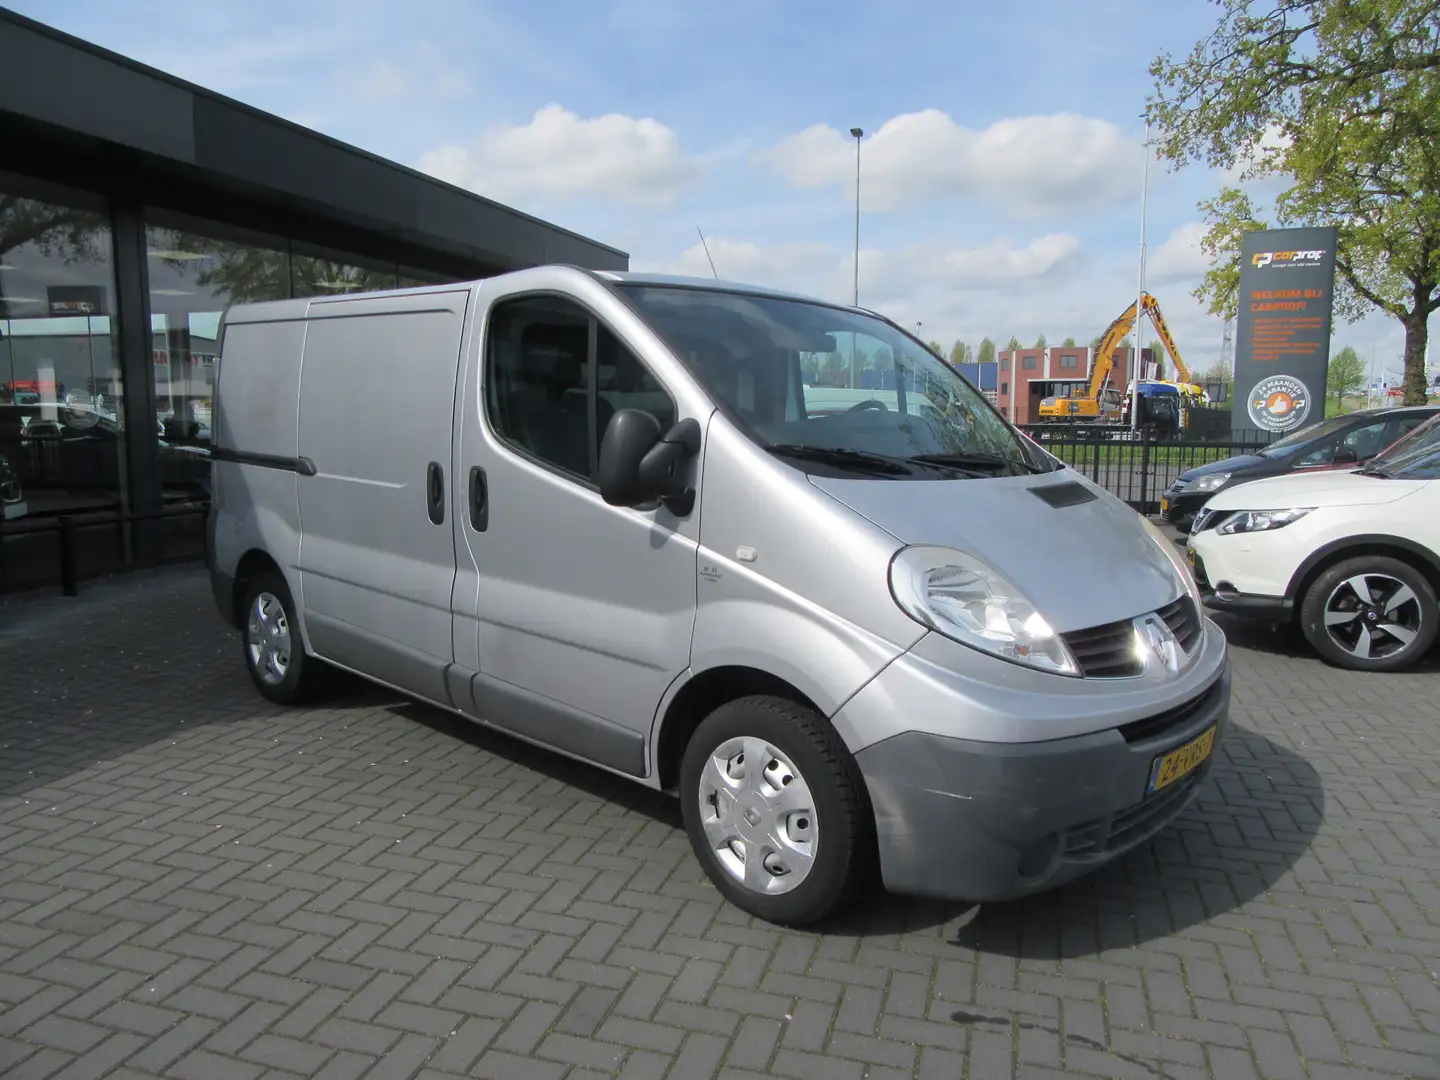 Renault Trafic 2.0 dCi T27 L1H1 Airco, Navi, Cruise Control, 2 sc Zilver - 2